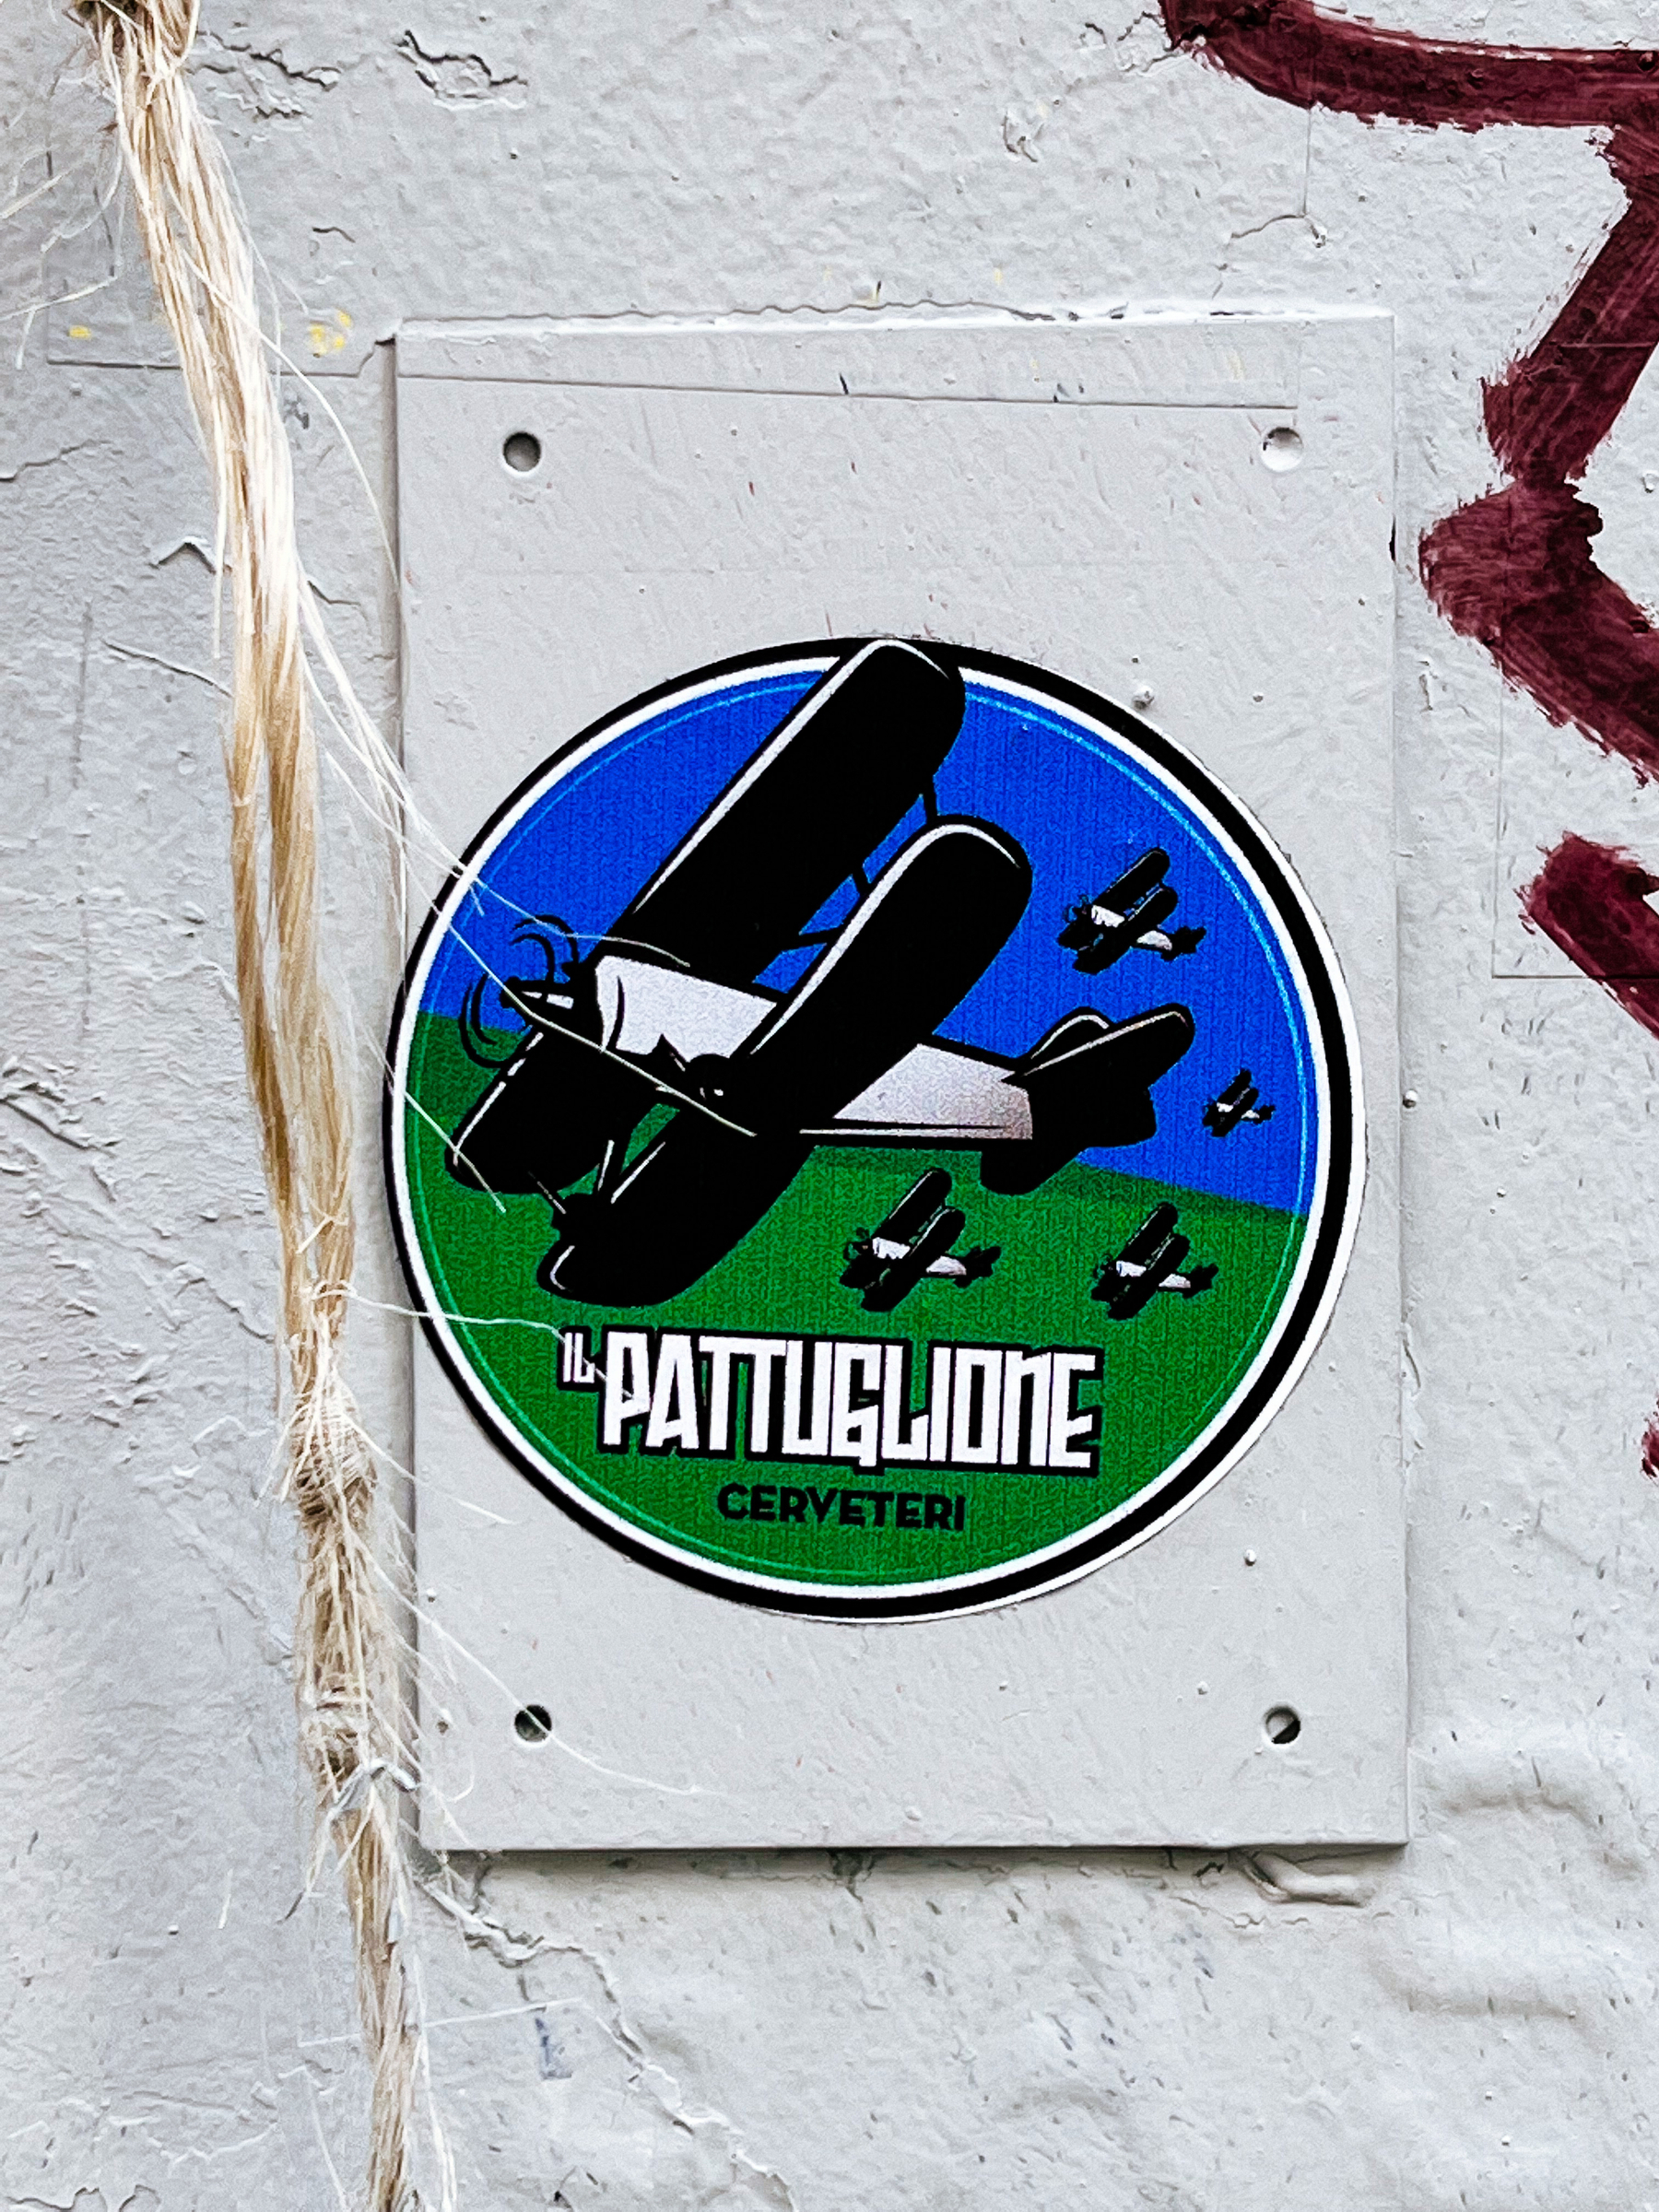 Sticker for “Pattuglione” brewery, with a bunch of vintage airplanes flying through the sky. 